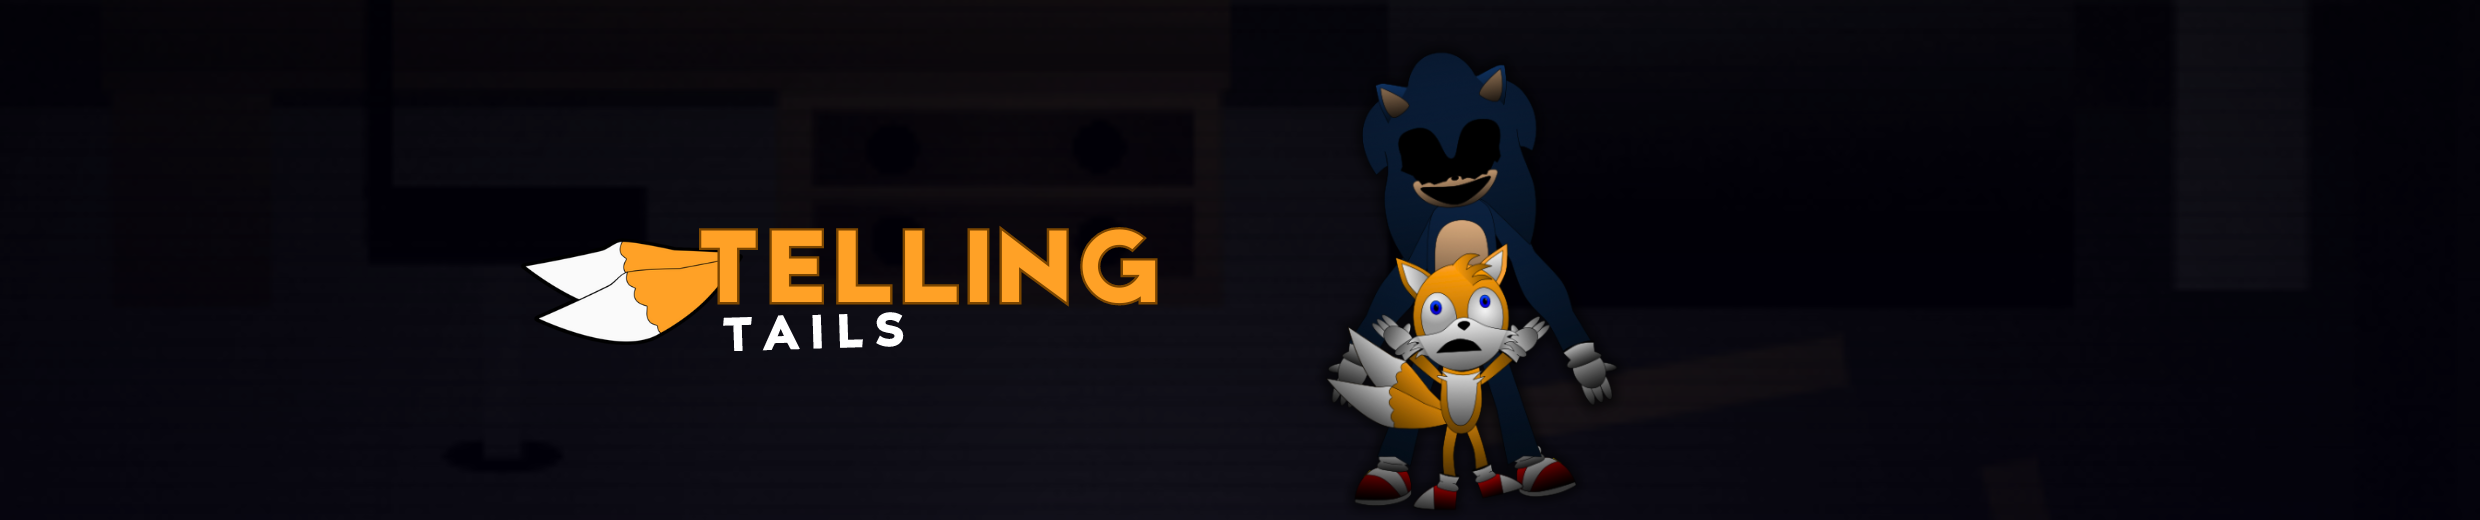 Telling Tails 1